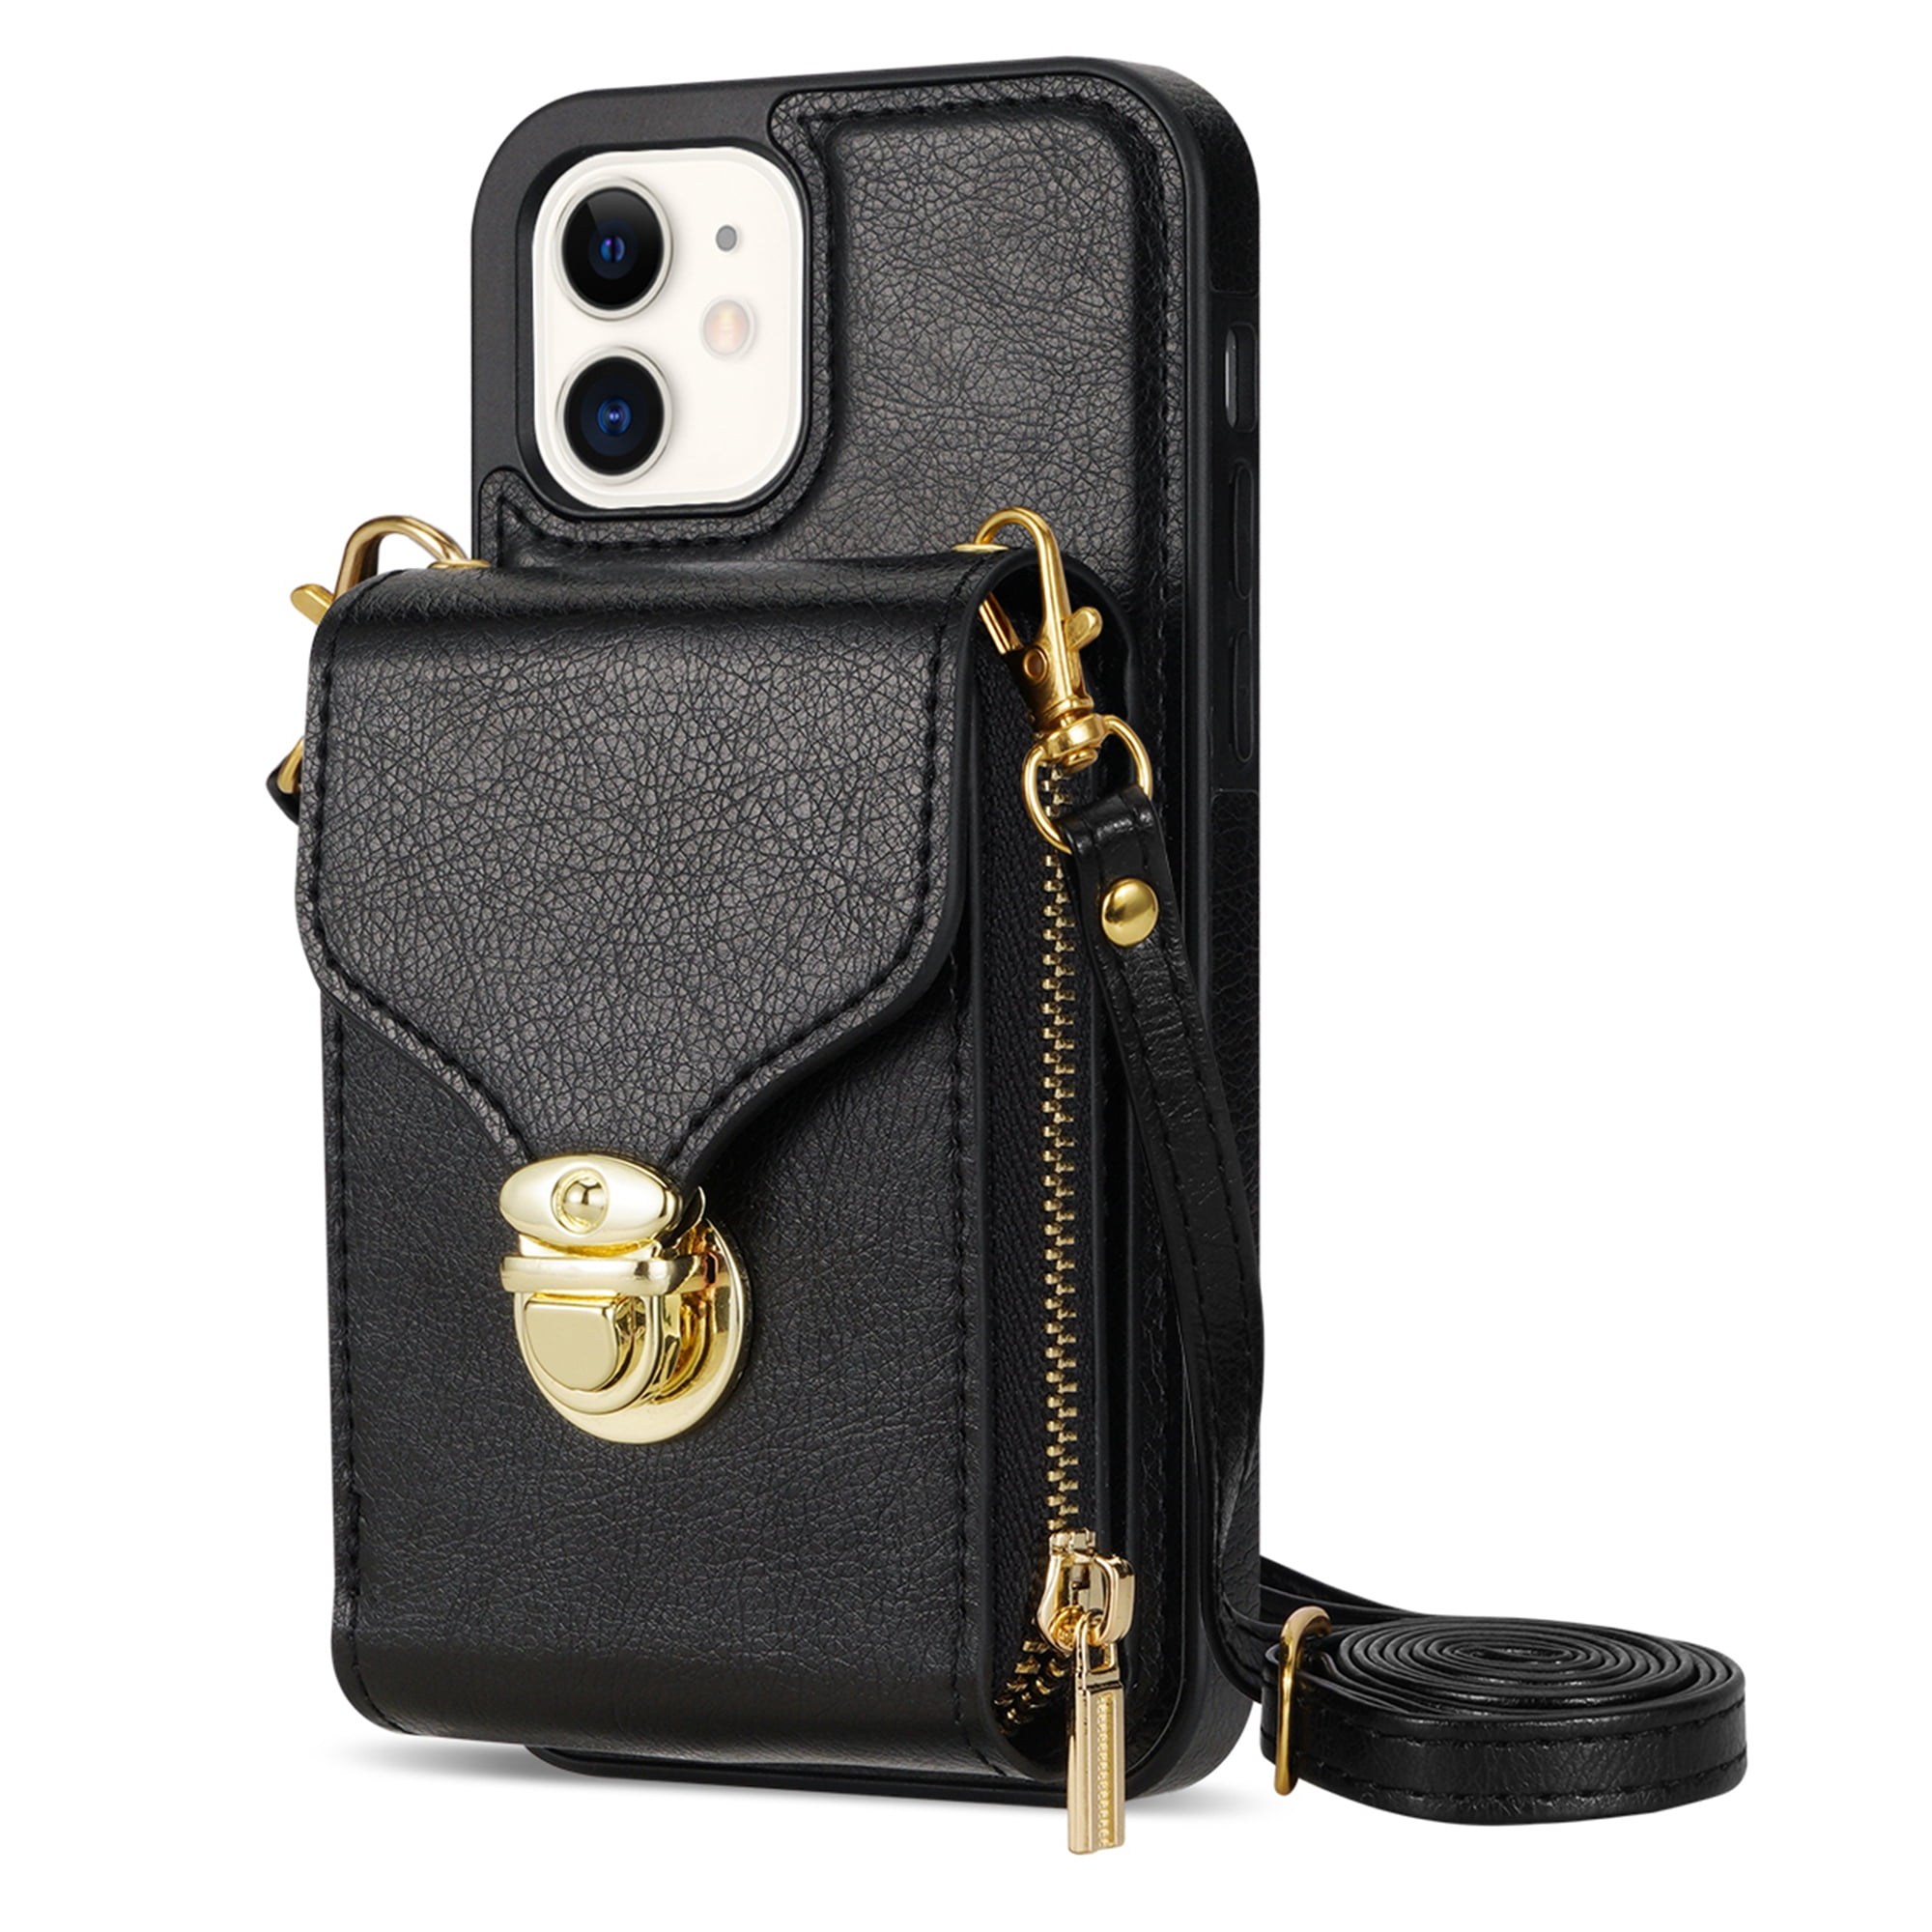 Dteck Wallet Case For iPhone 11, Crossbody Zipper Wallet Case with Credit  Card Holder Slot Purse Leather Protective Case Cover For Apple iPhone 11  6.1